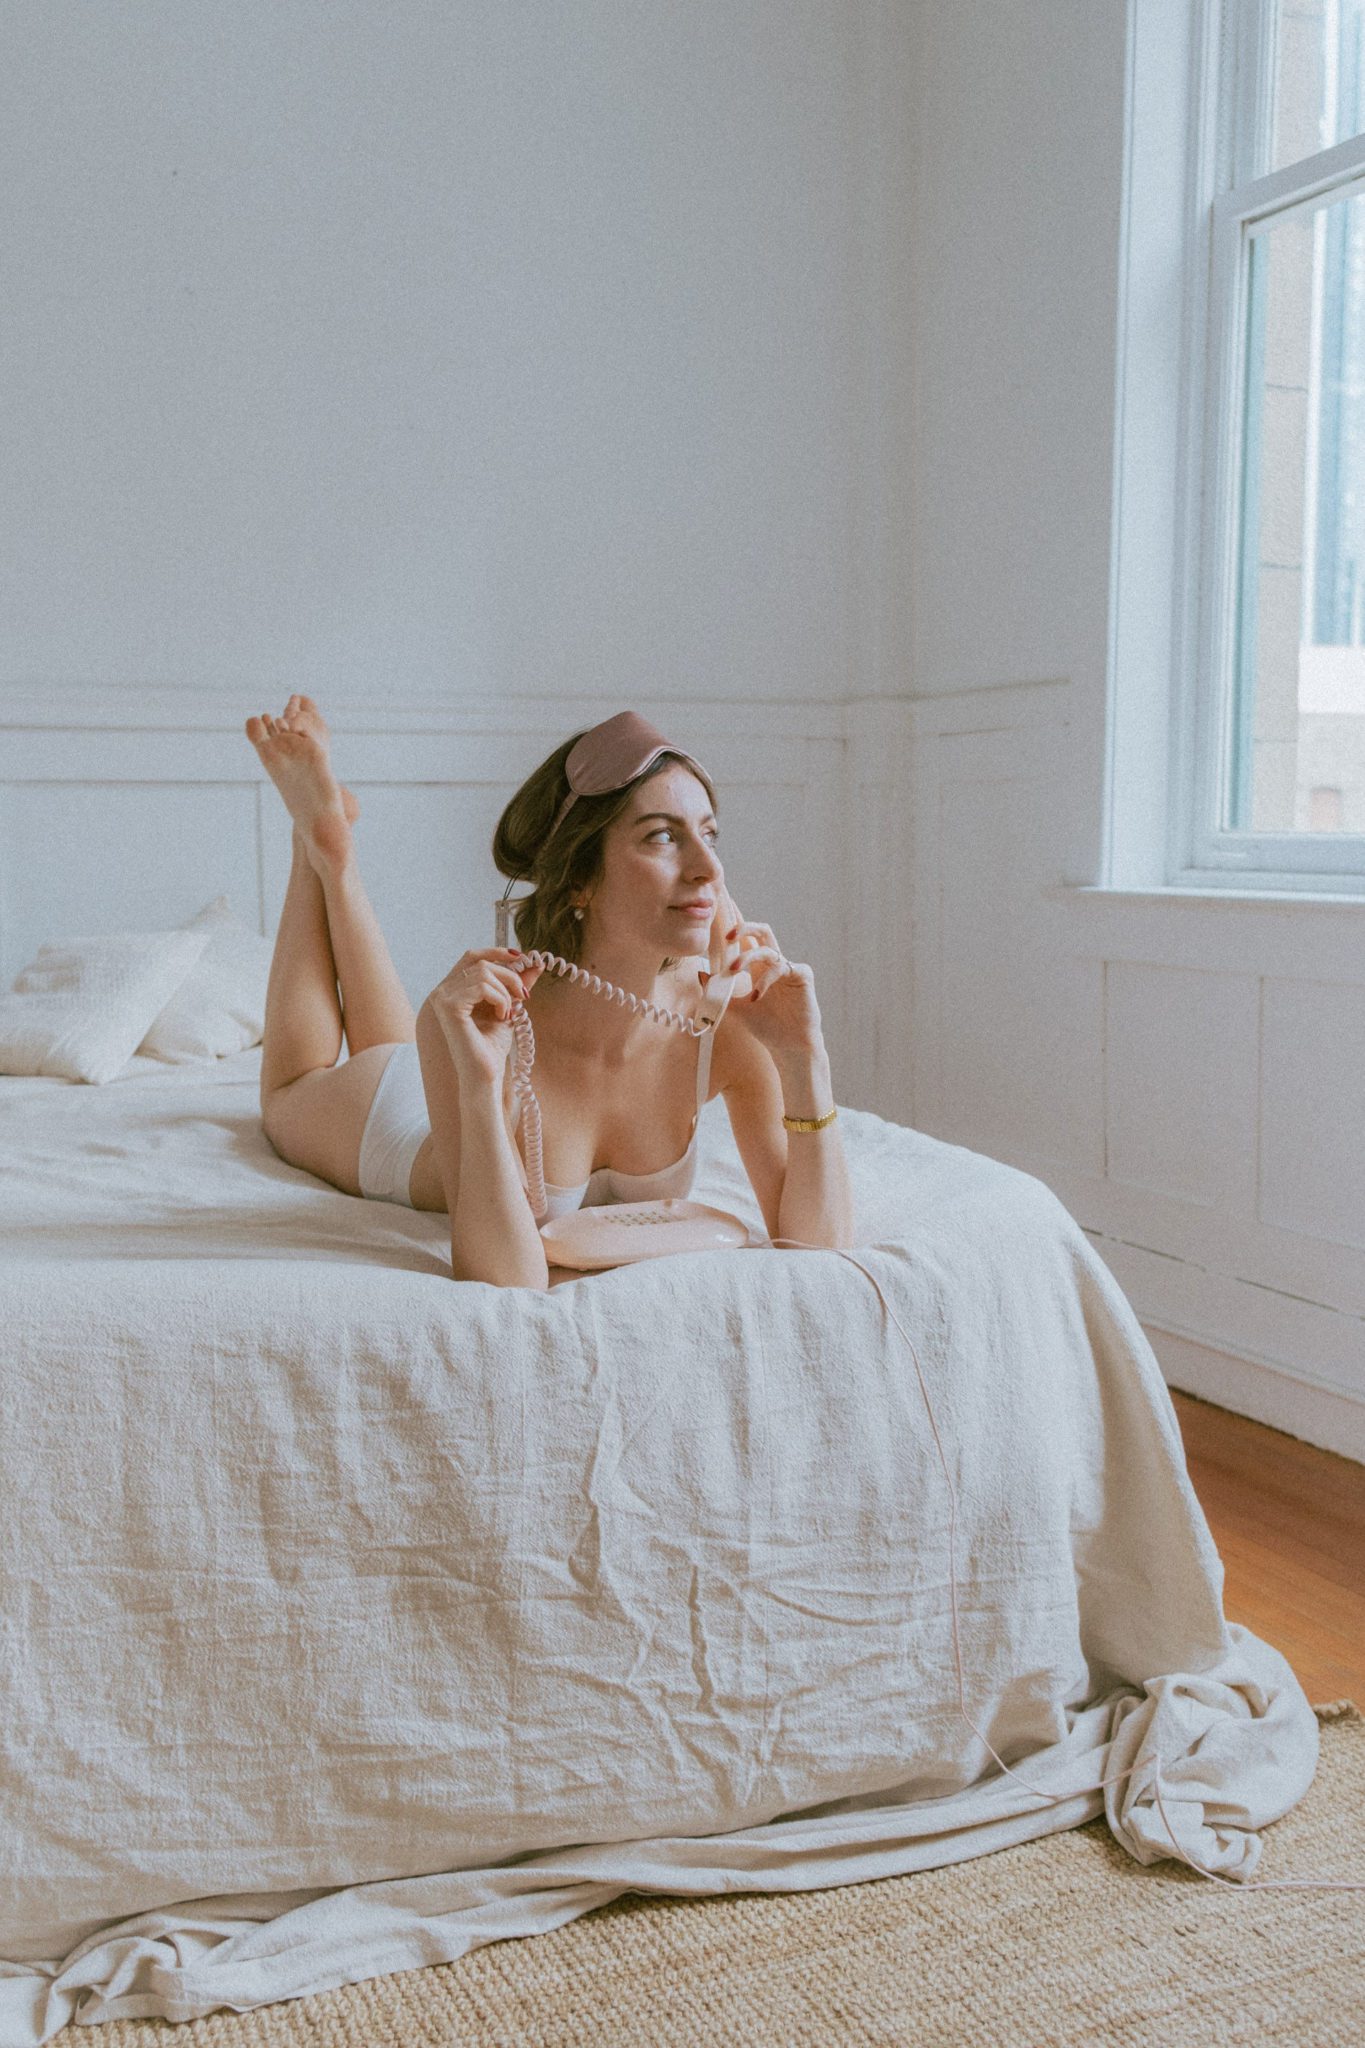 Retro romance and vintage vibes for this intimate self-love shoot.